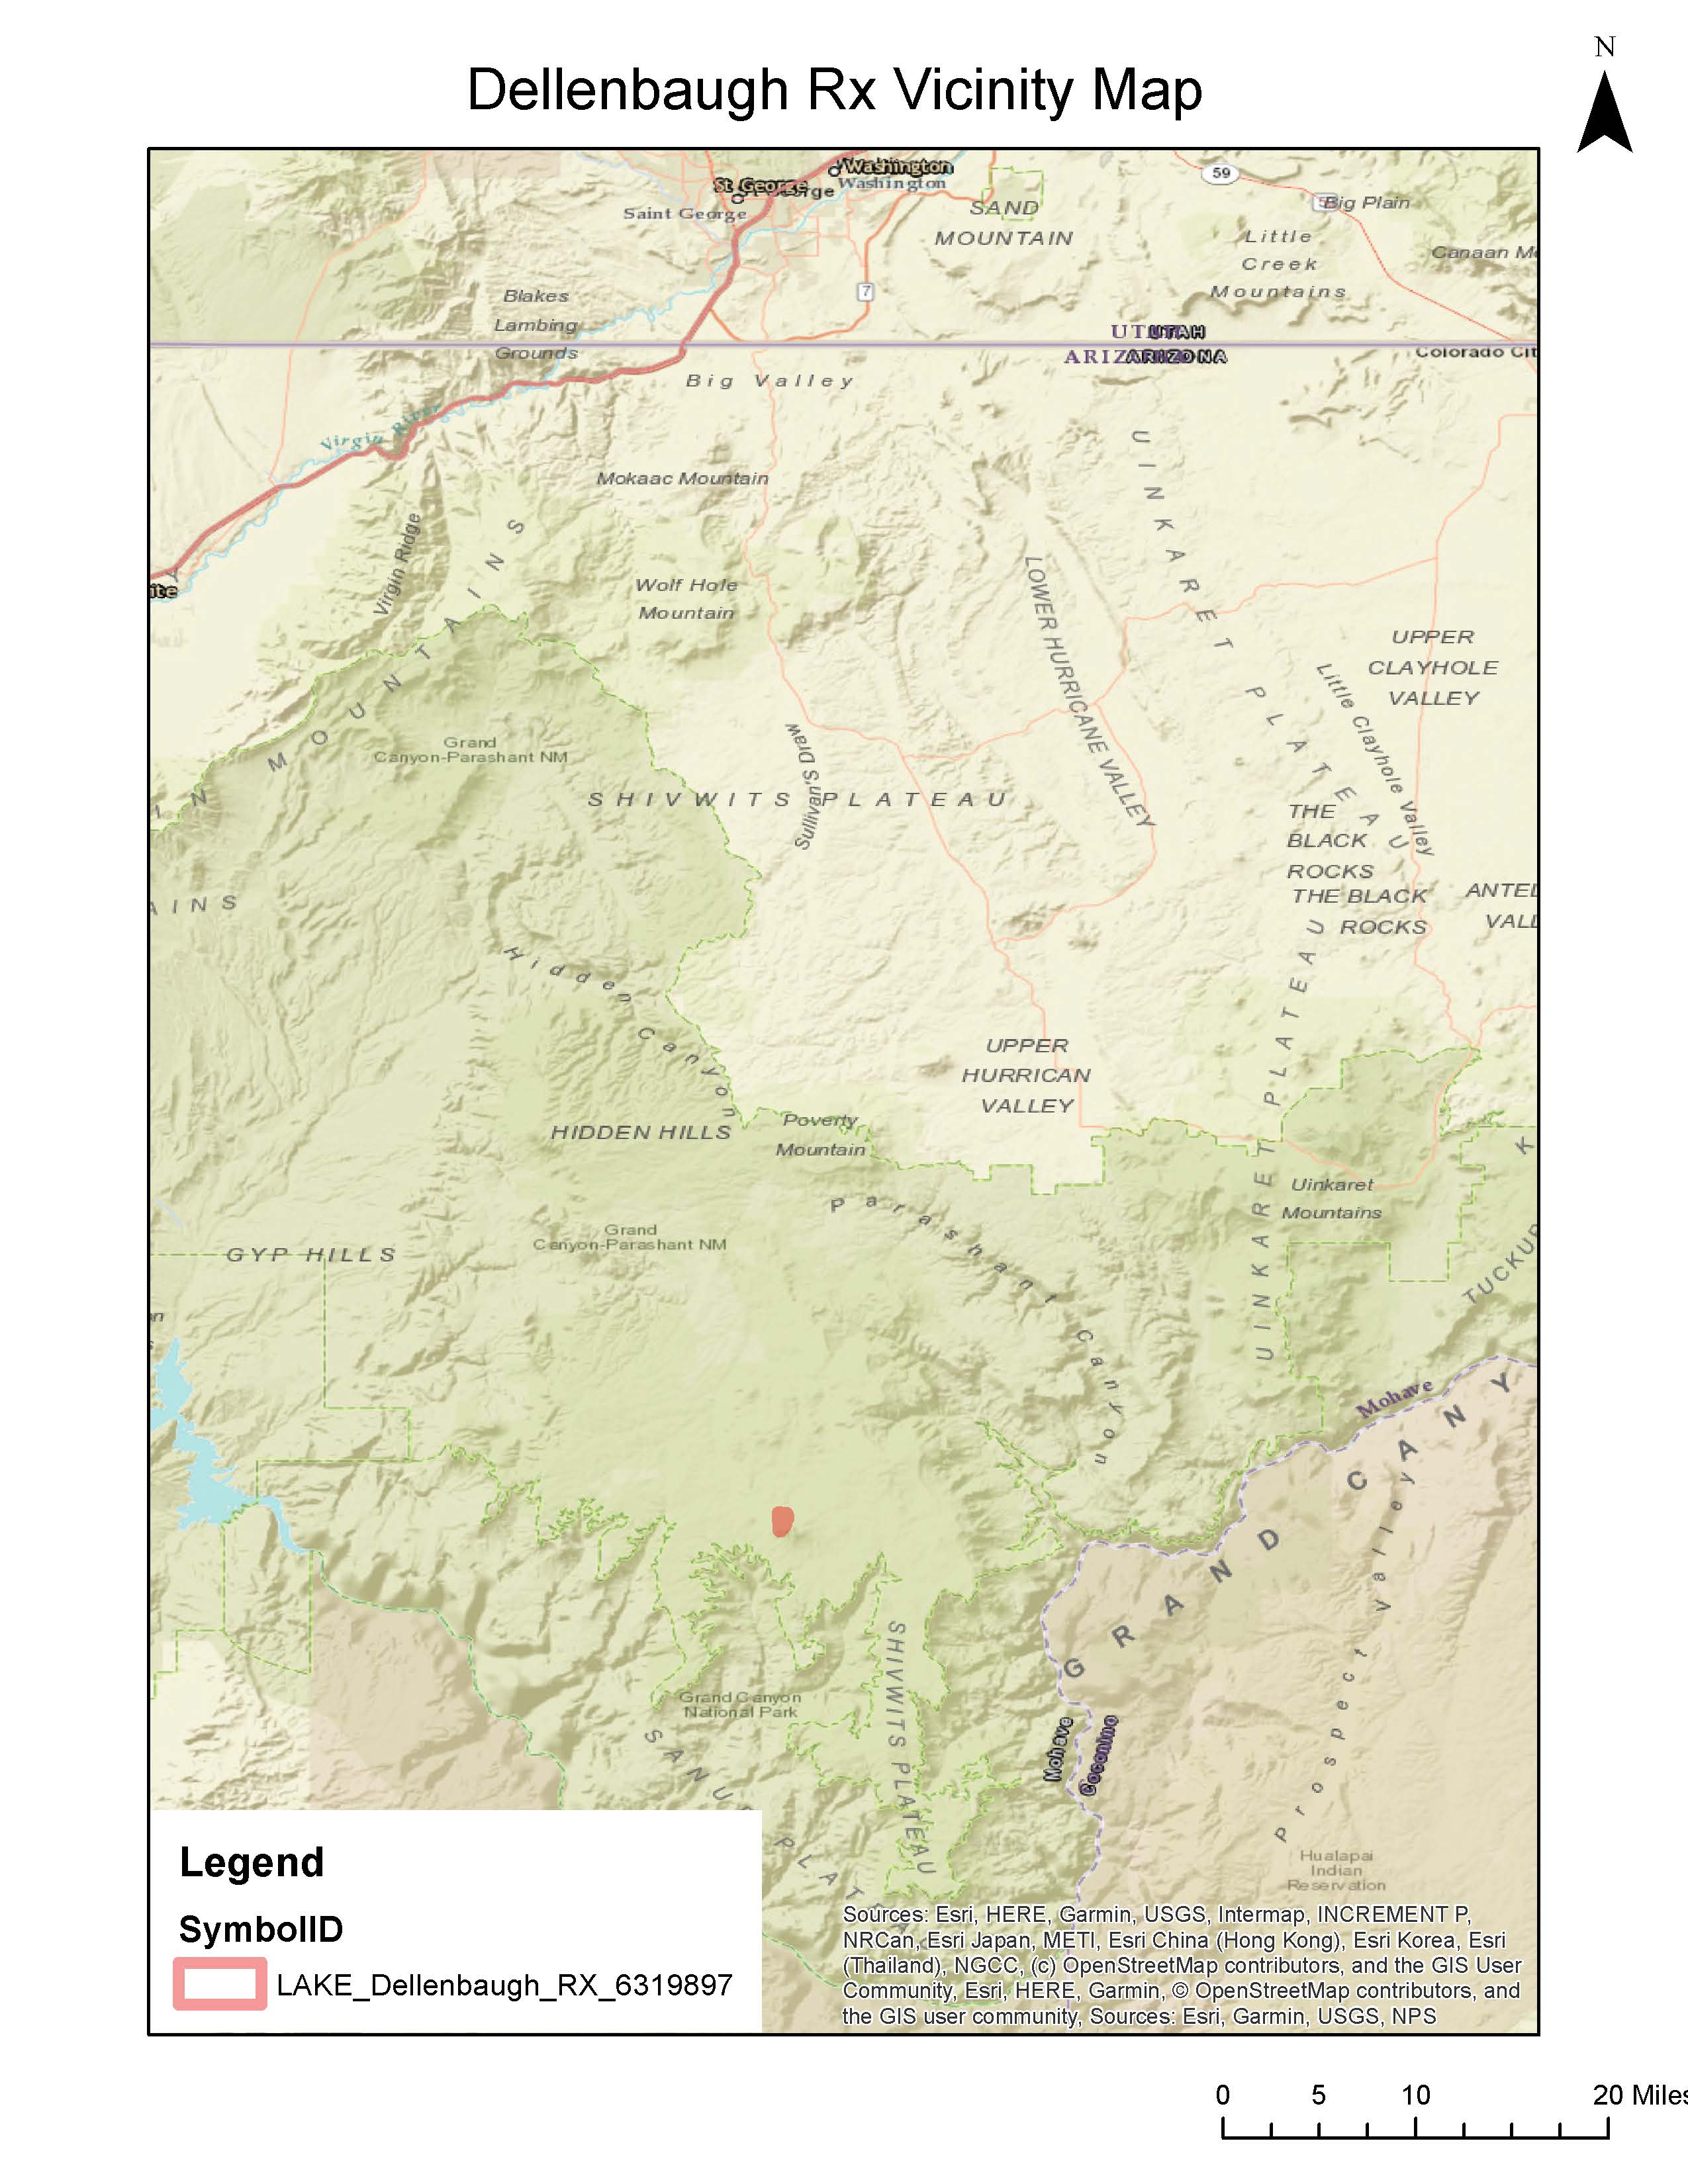 Map of the LAKE_Dellenbaugh_RX_6319897 prescribed burn area. For further information on the prescribed fire please call the Grand Canyon - Parashant Fire Management information line at 702-293-8676.